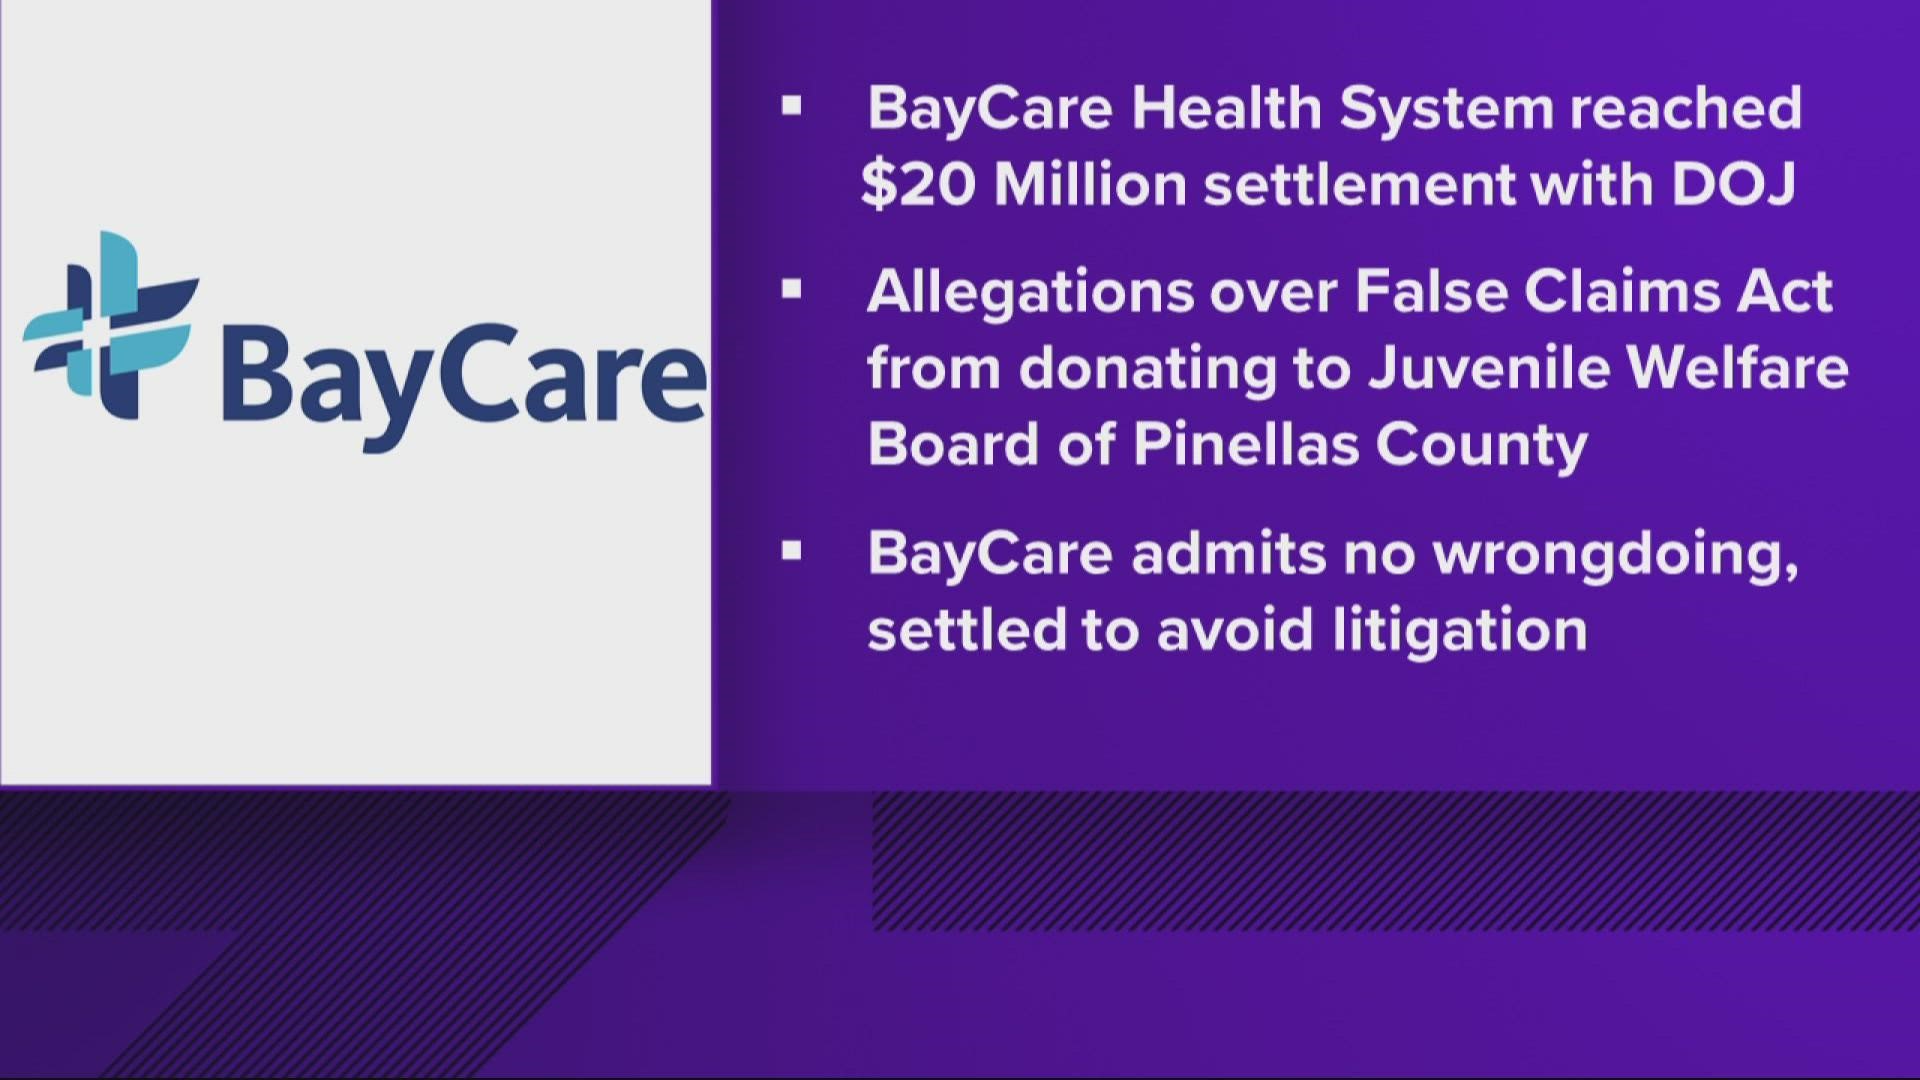 BayCare still denies the allegations, but the hospital system says it settled to avoid expensive and likely lengthy litigation.